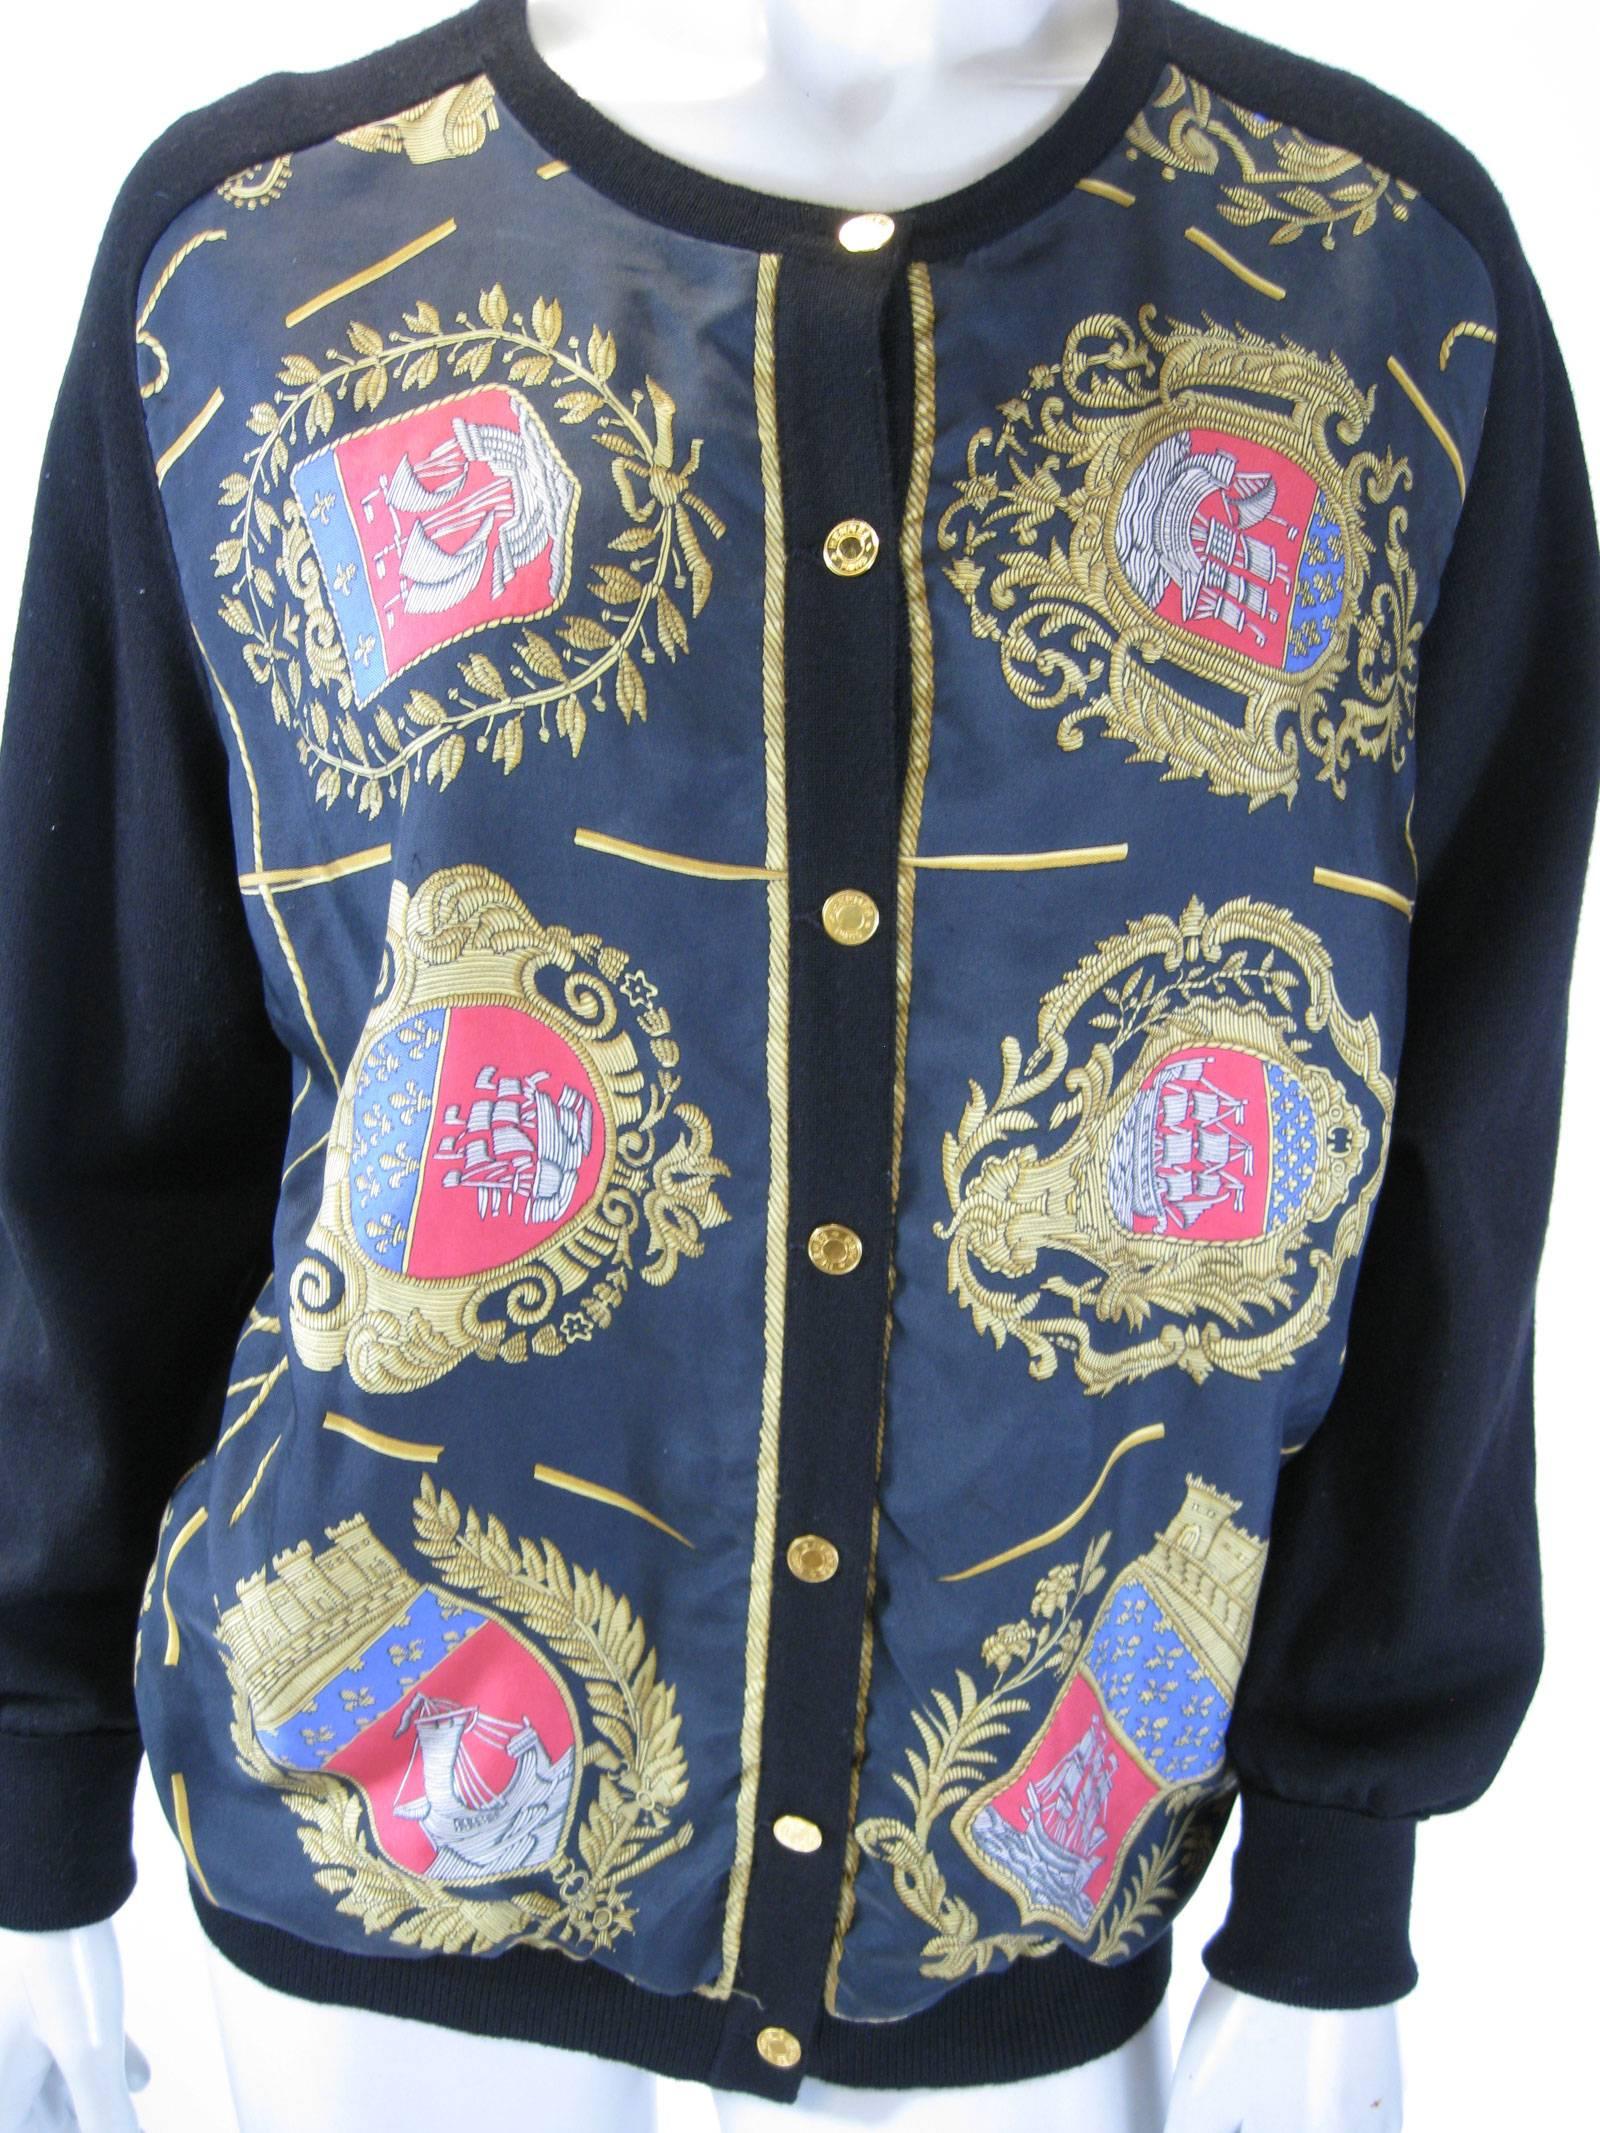 Vintage Hermes black silk and wool cardigan.
Front silk panels, wool arms and back.
Striking gold, blue and red emblems featuring wooden ships.
Hermes stamped gold buttons.
Unlined.
Tagged a size 44.

Bust: 44